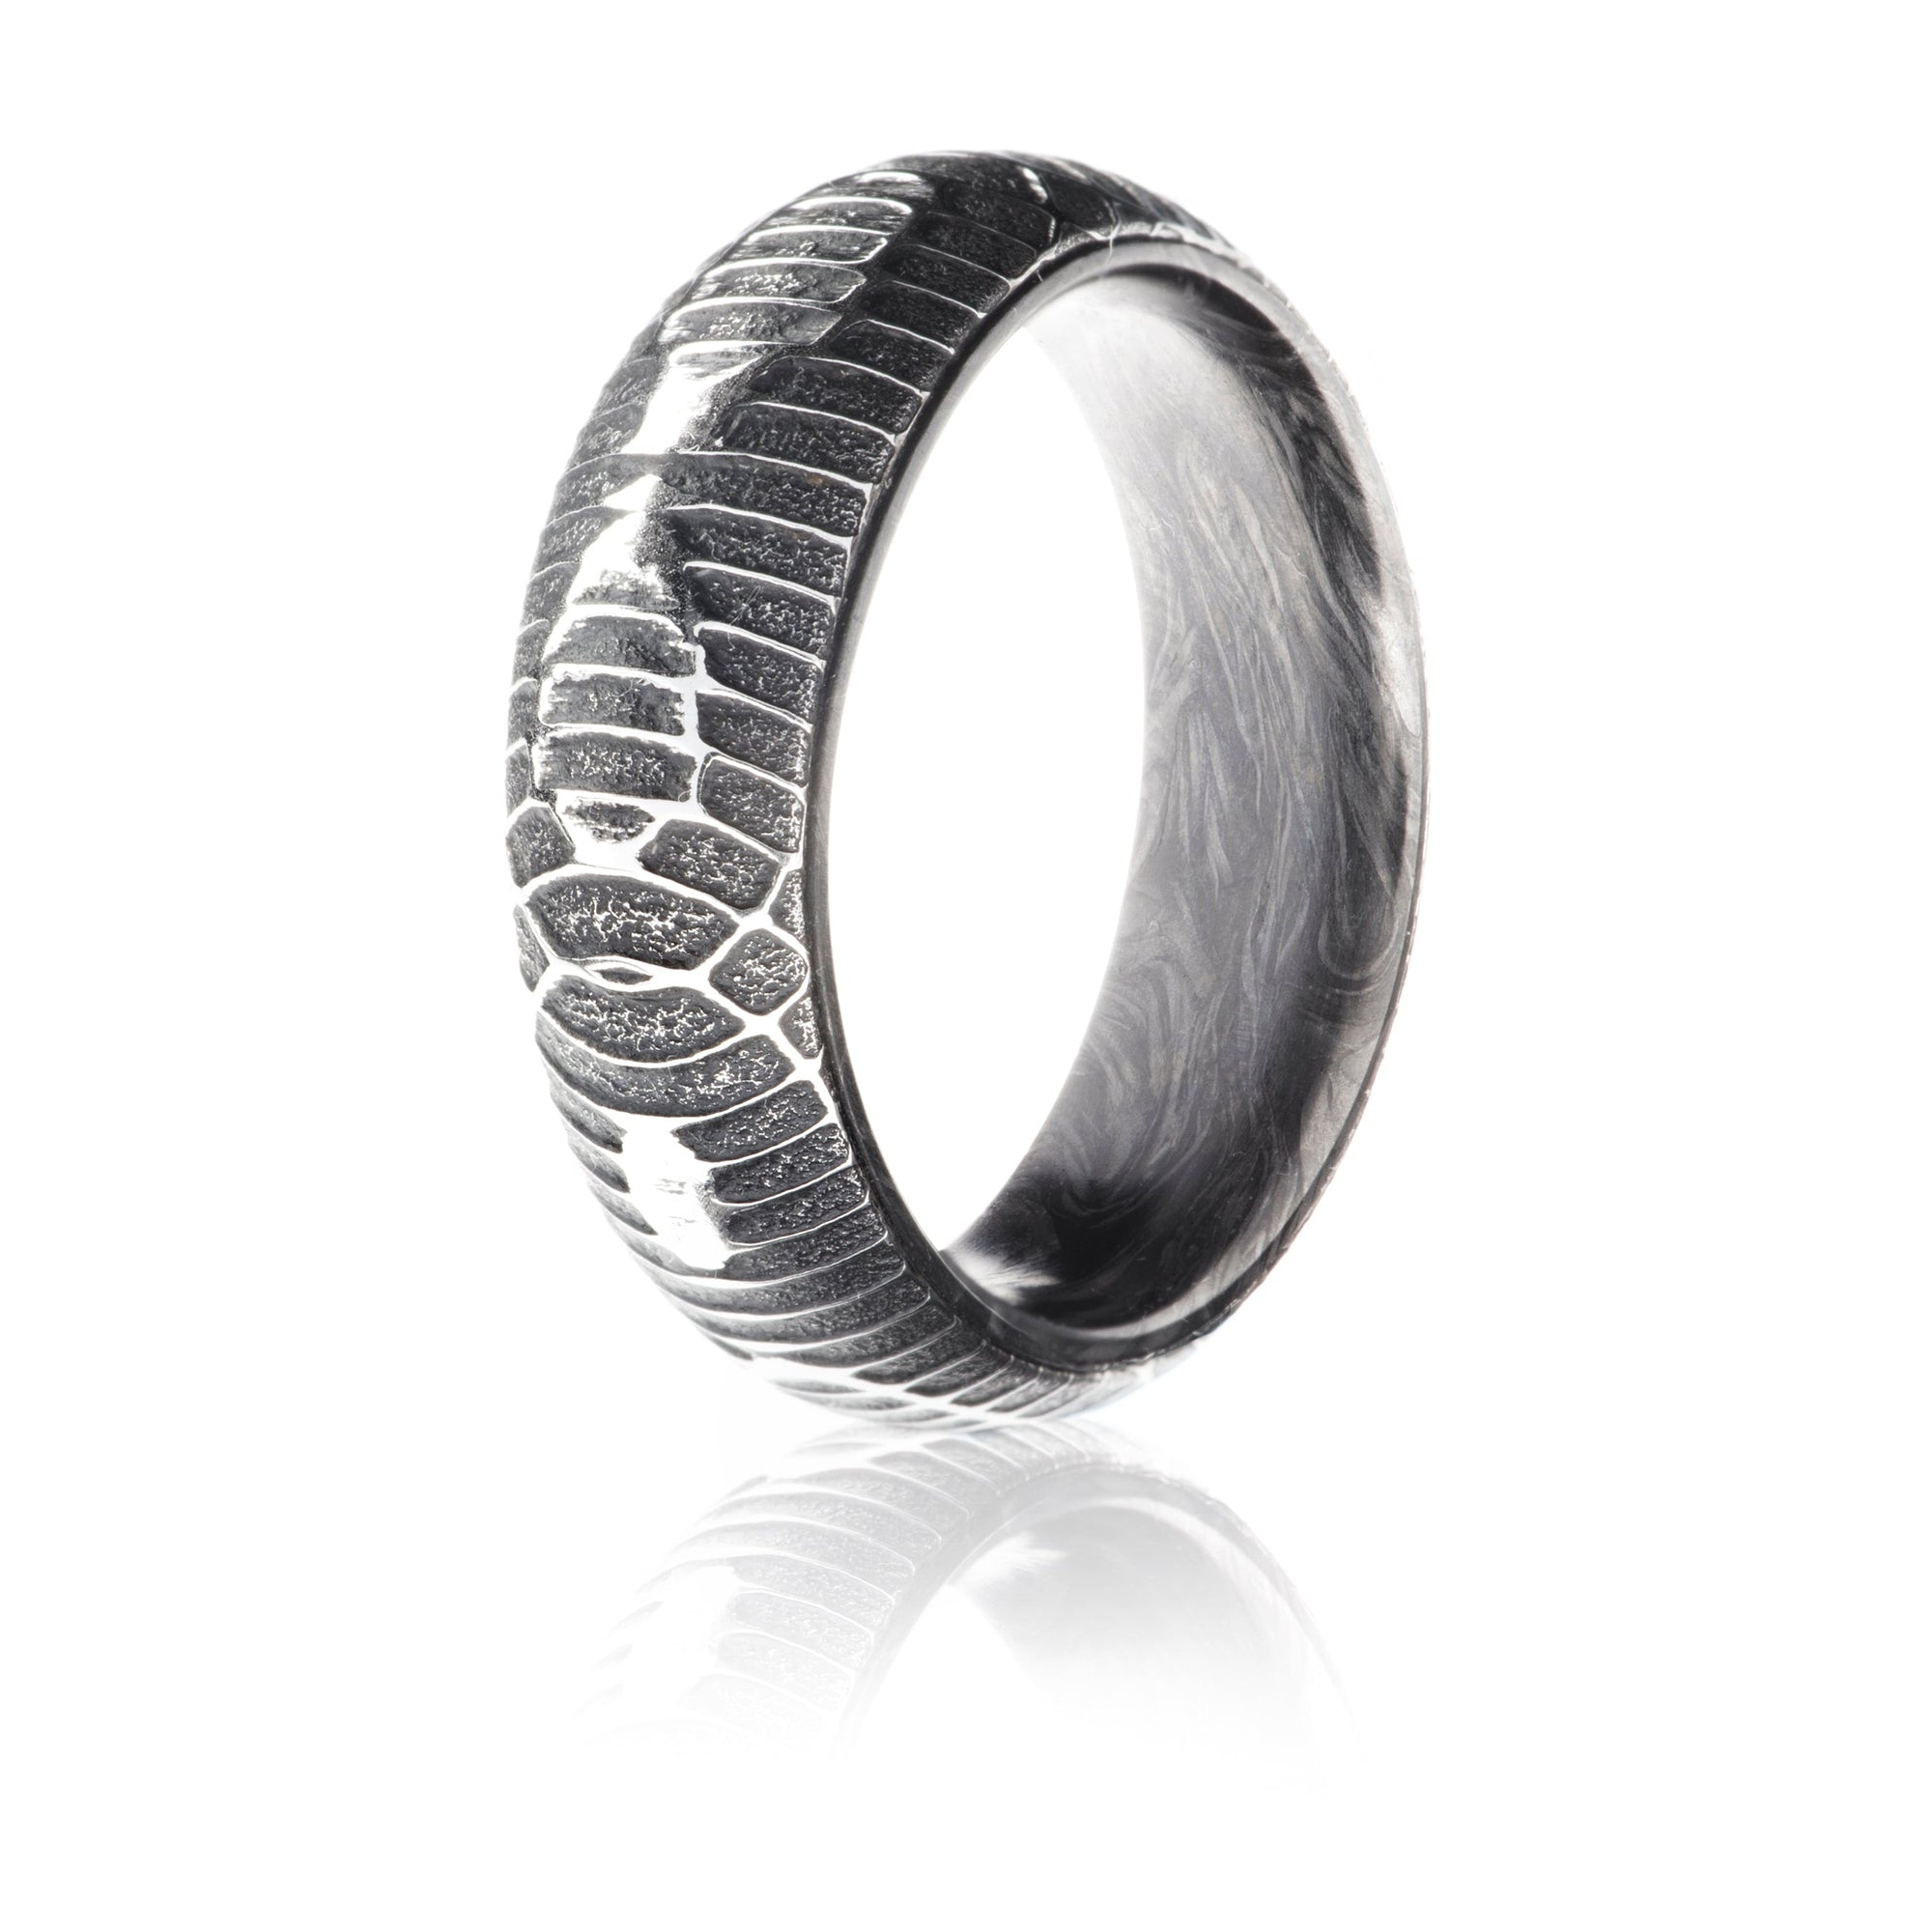 Damascus Steel ring with textured snakeskin pattern exterior and forged carbon fiber interior. 